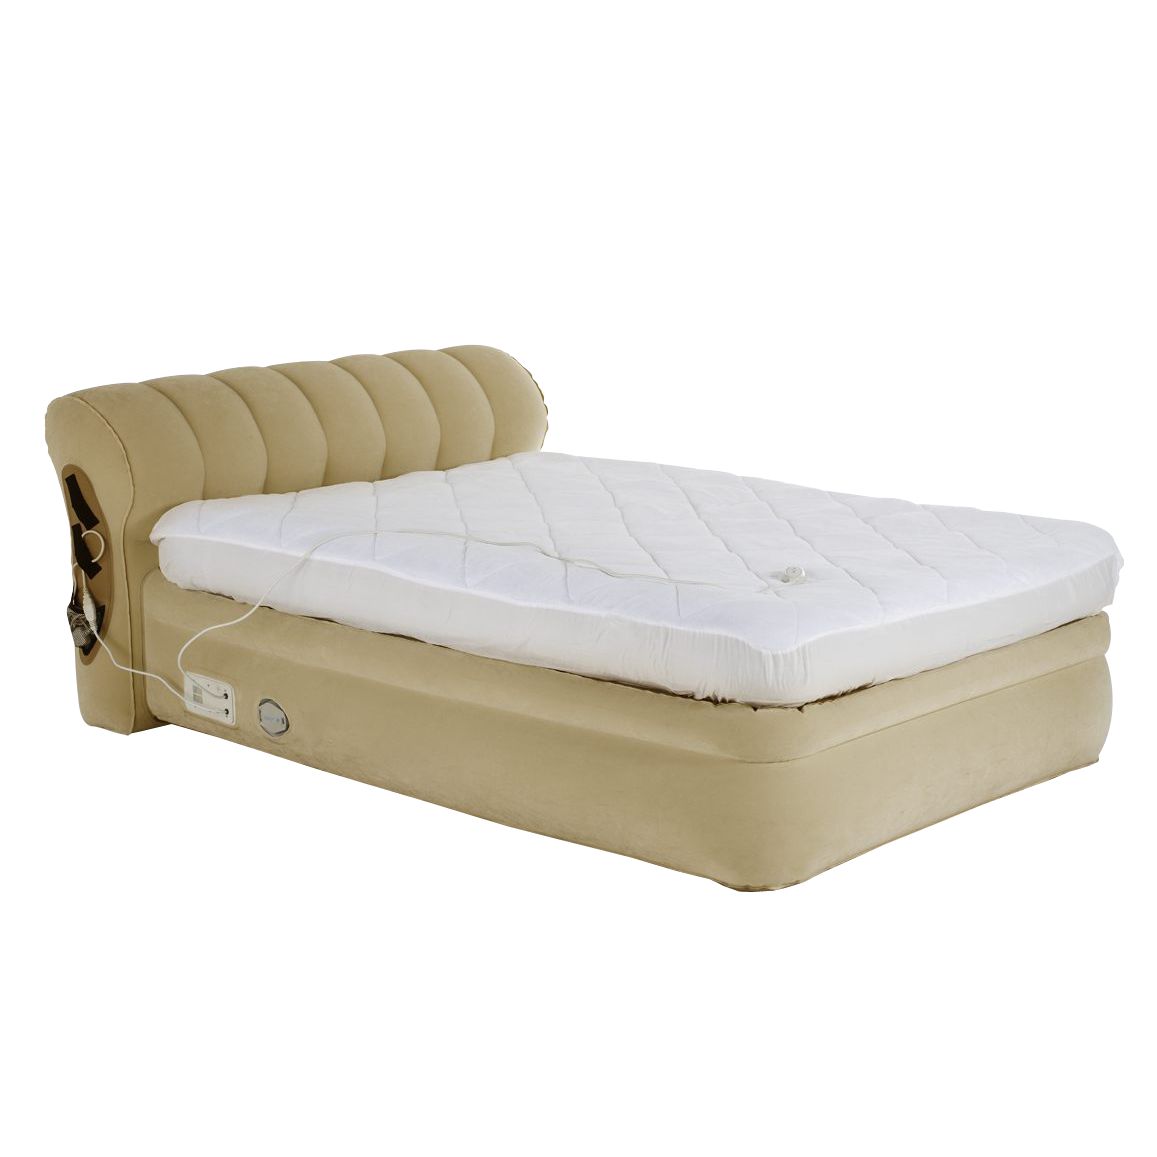 Platinum Raised Inflatable Guest Beds